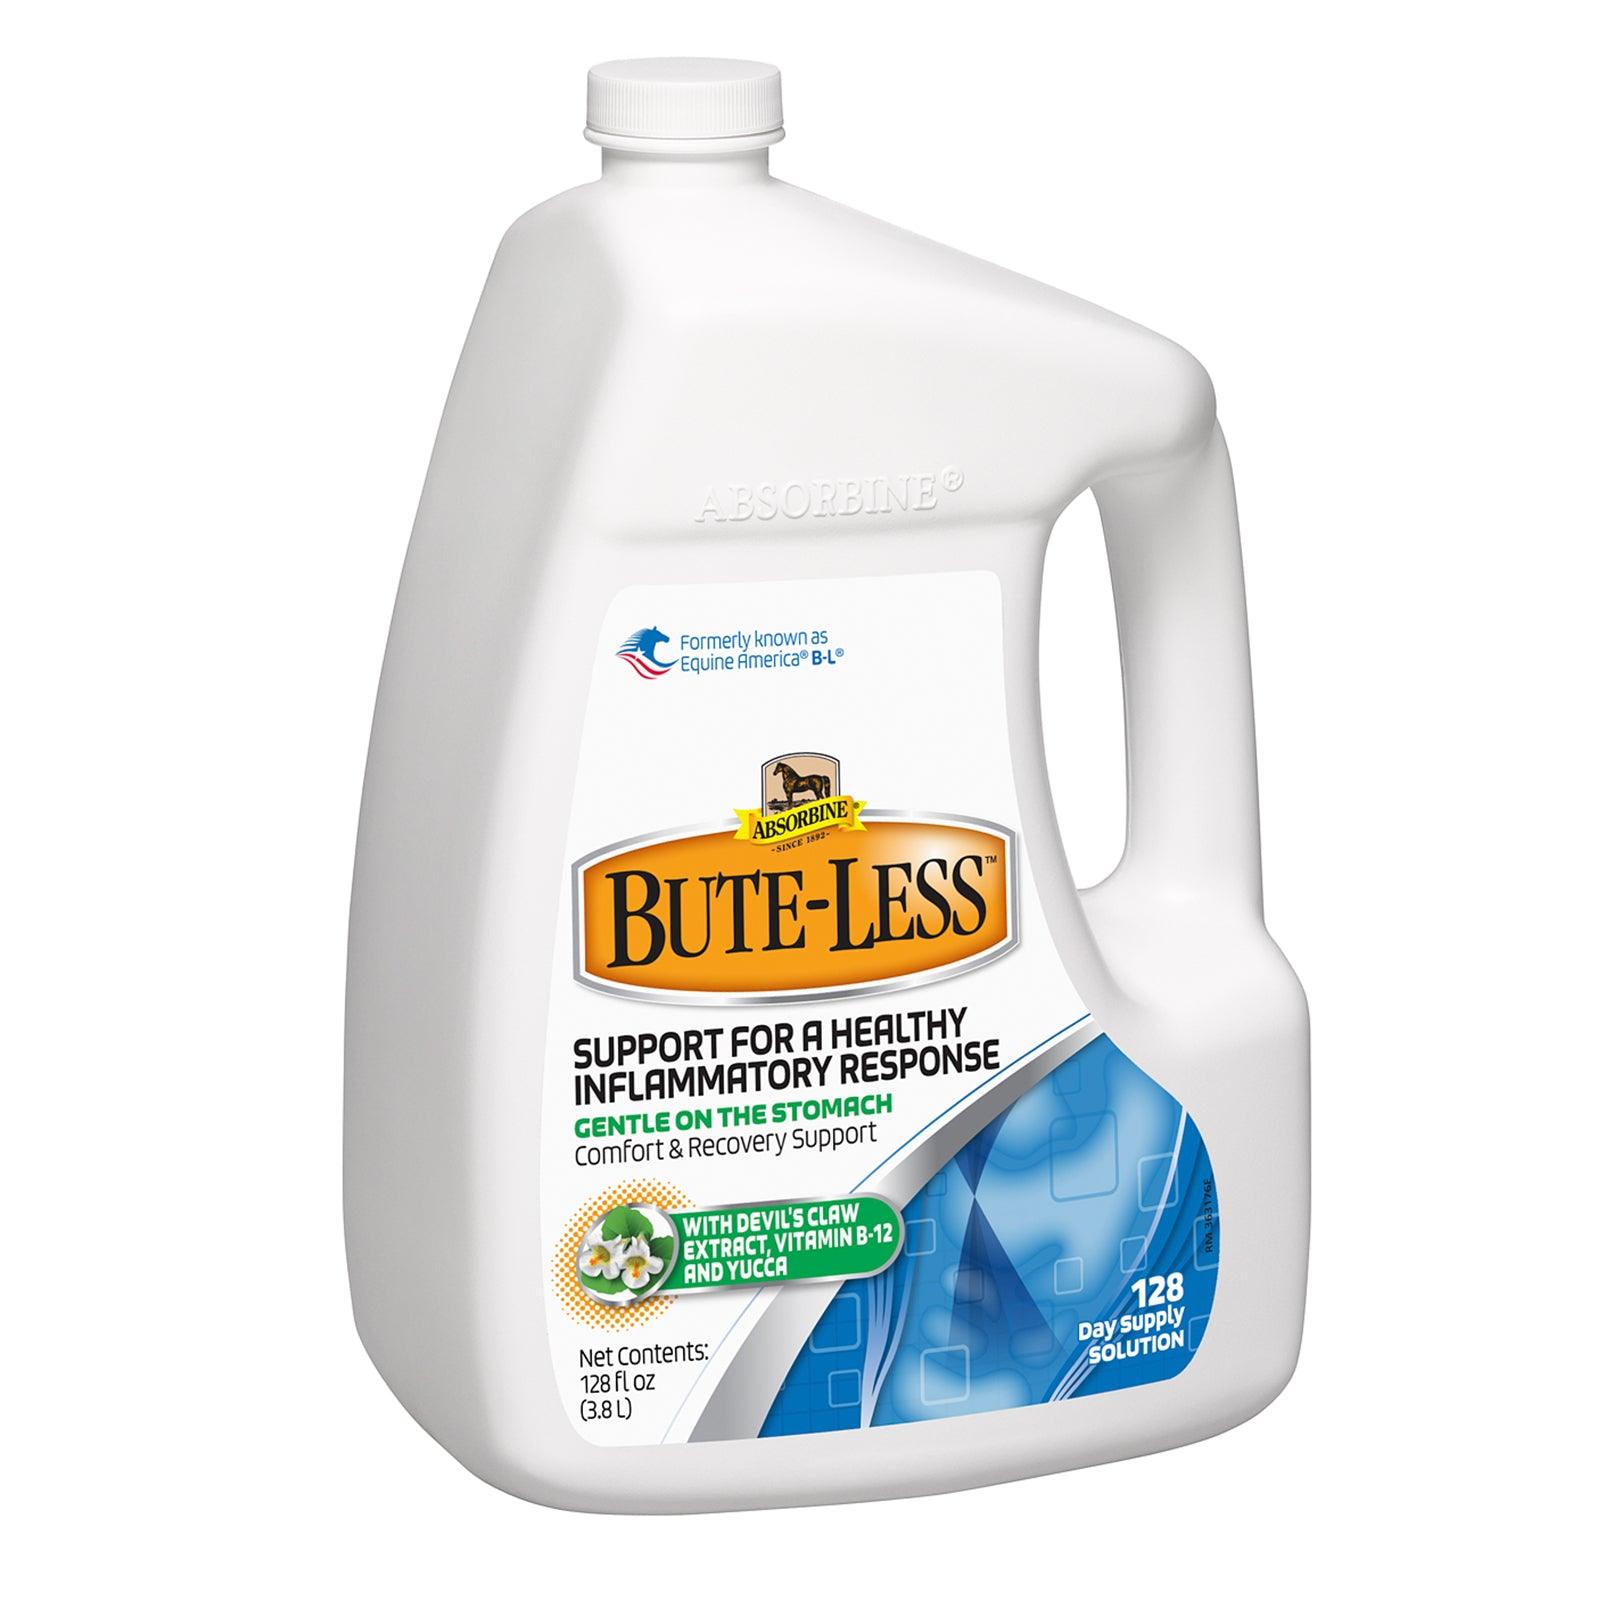 Bute-less 128 fluid oz support for a healthy inflammatory response, gentle on stomach, comfort and recovery support 128 day supply solution. With devil's claw extract, vitamin B-12 and Yucca.